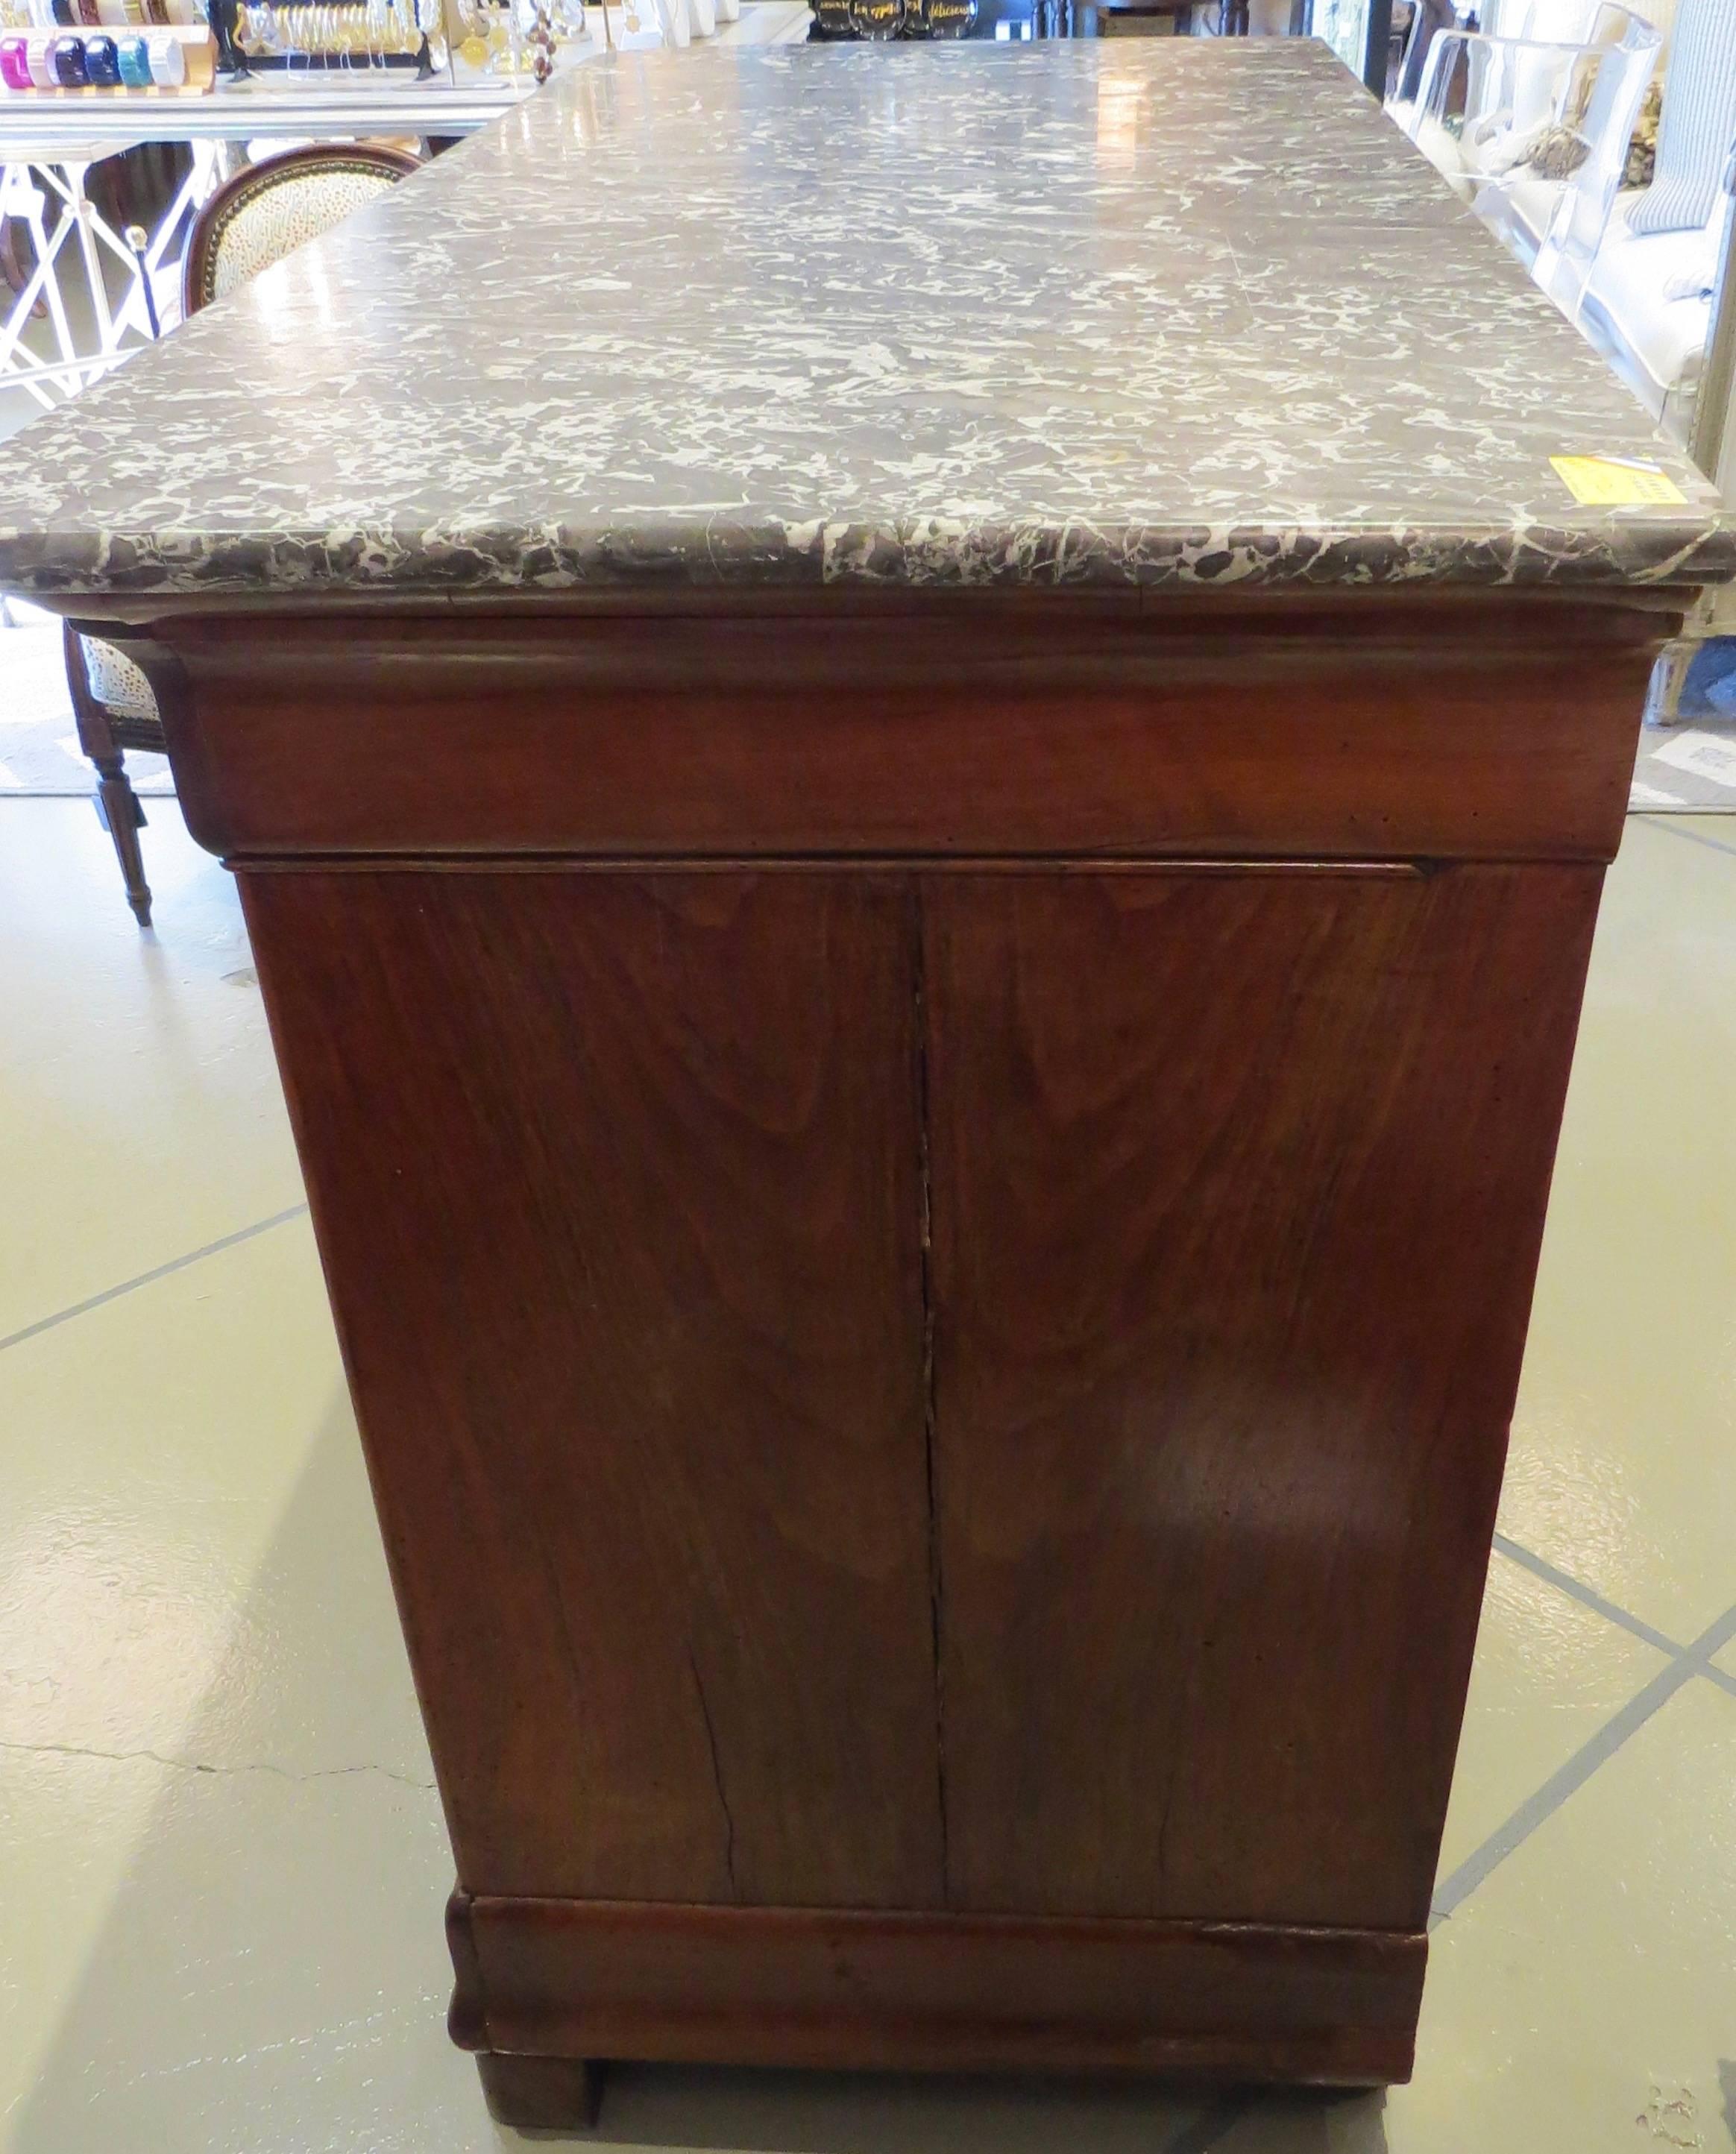 This French commode has four drawers and a marble top. The wood is stained. A key locks the top drawer.